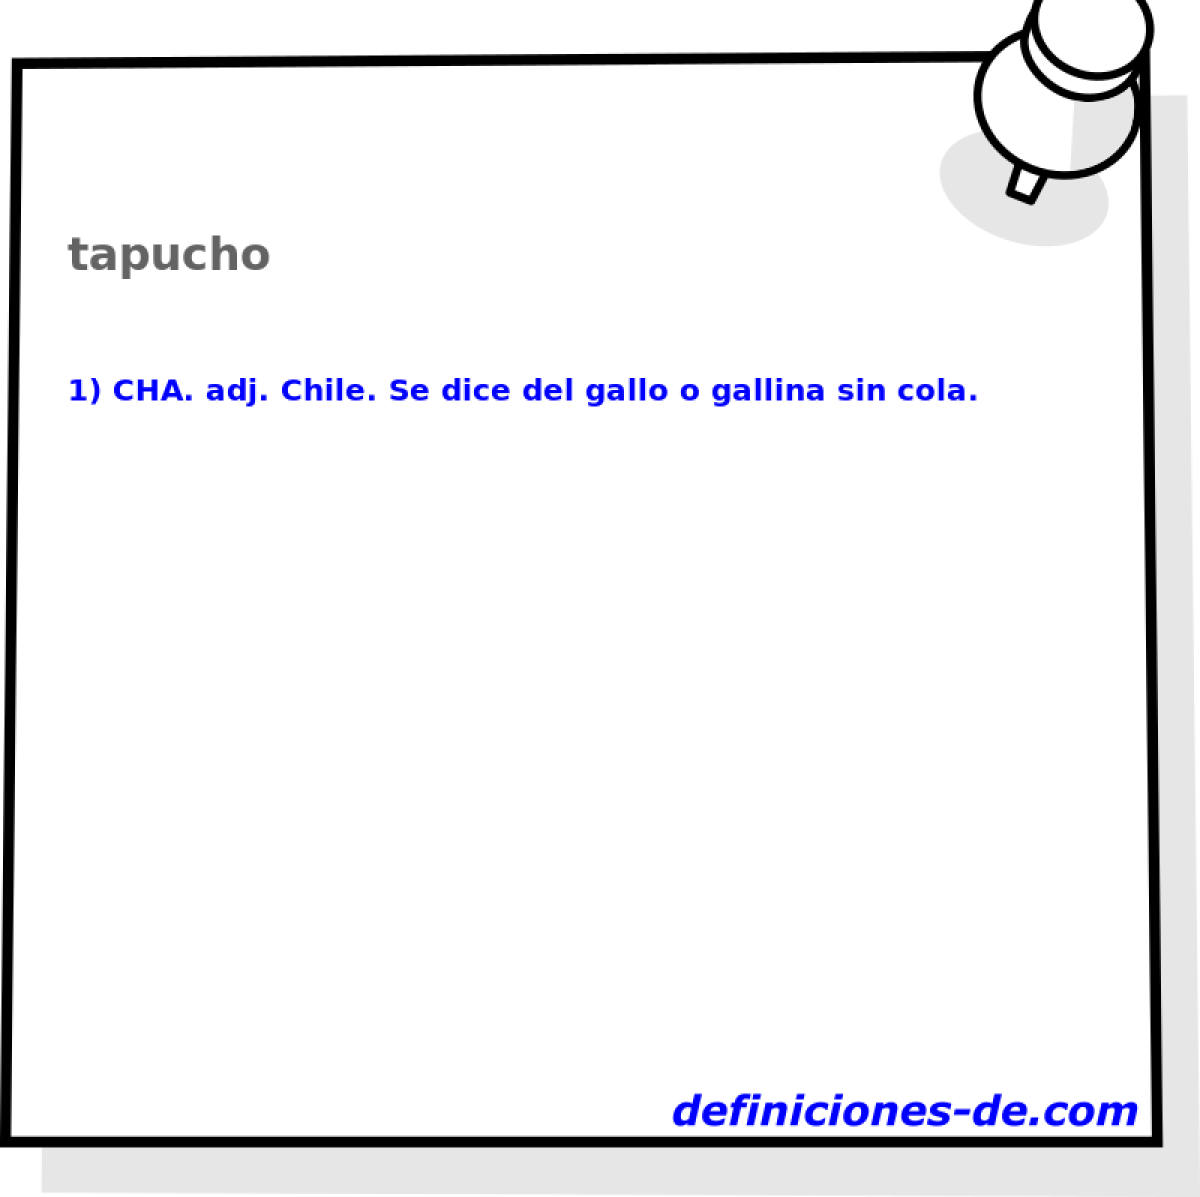 tapucho 